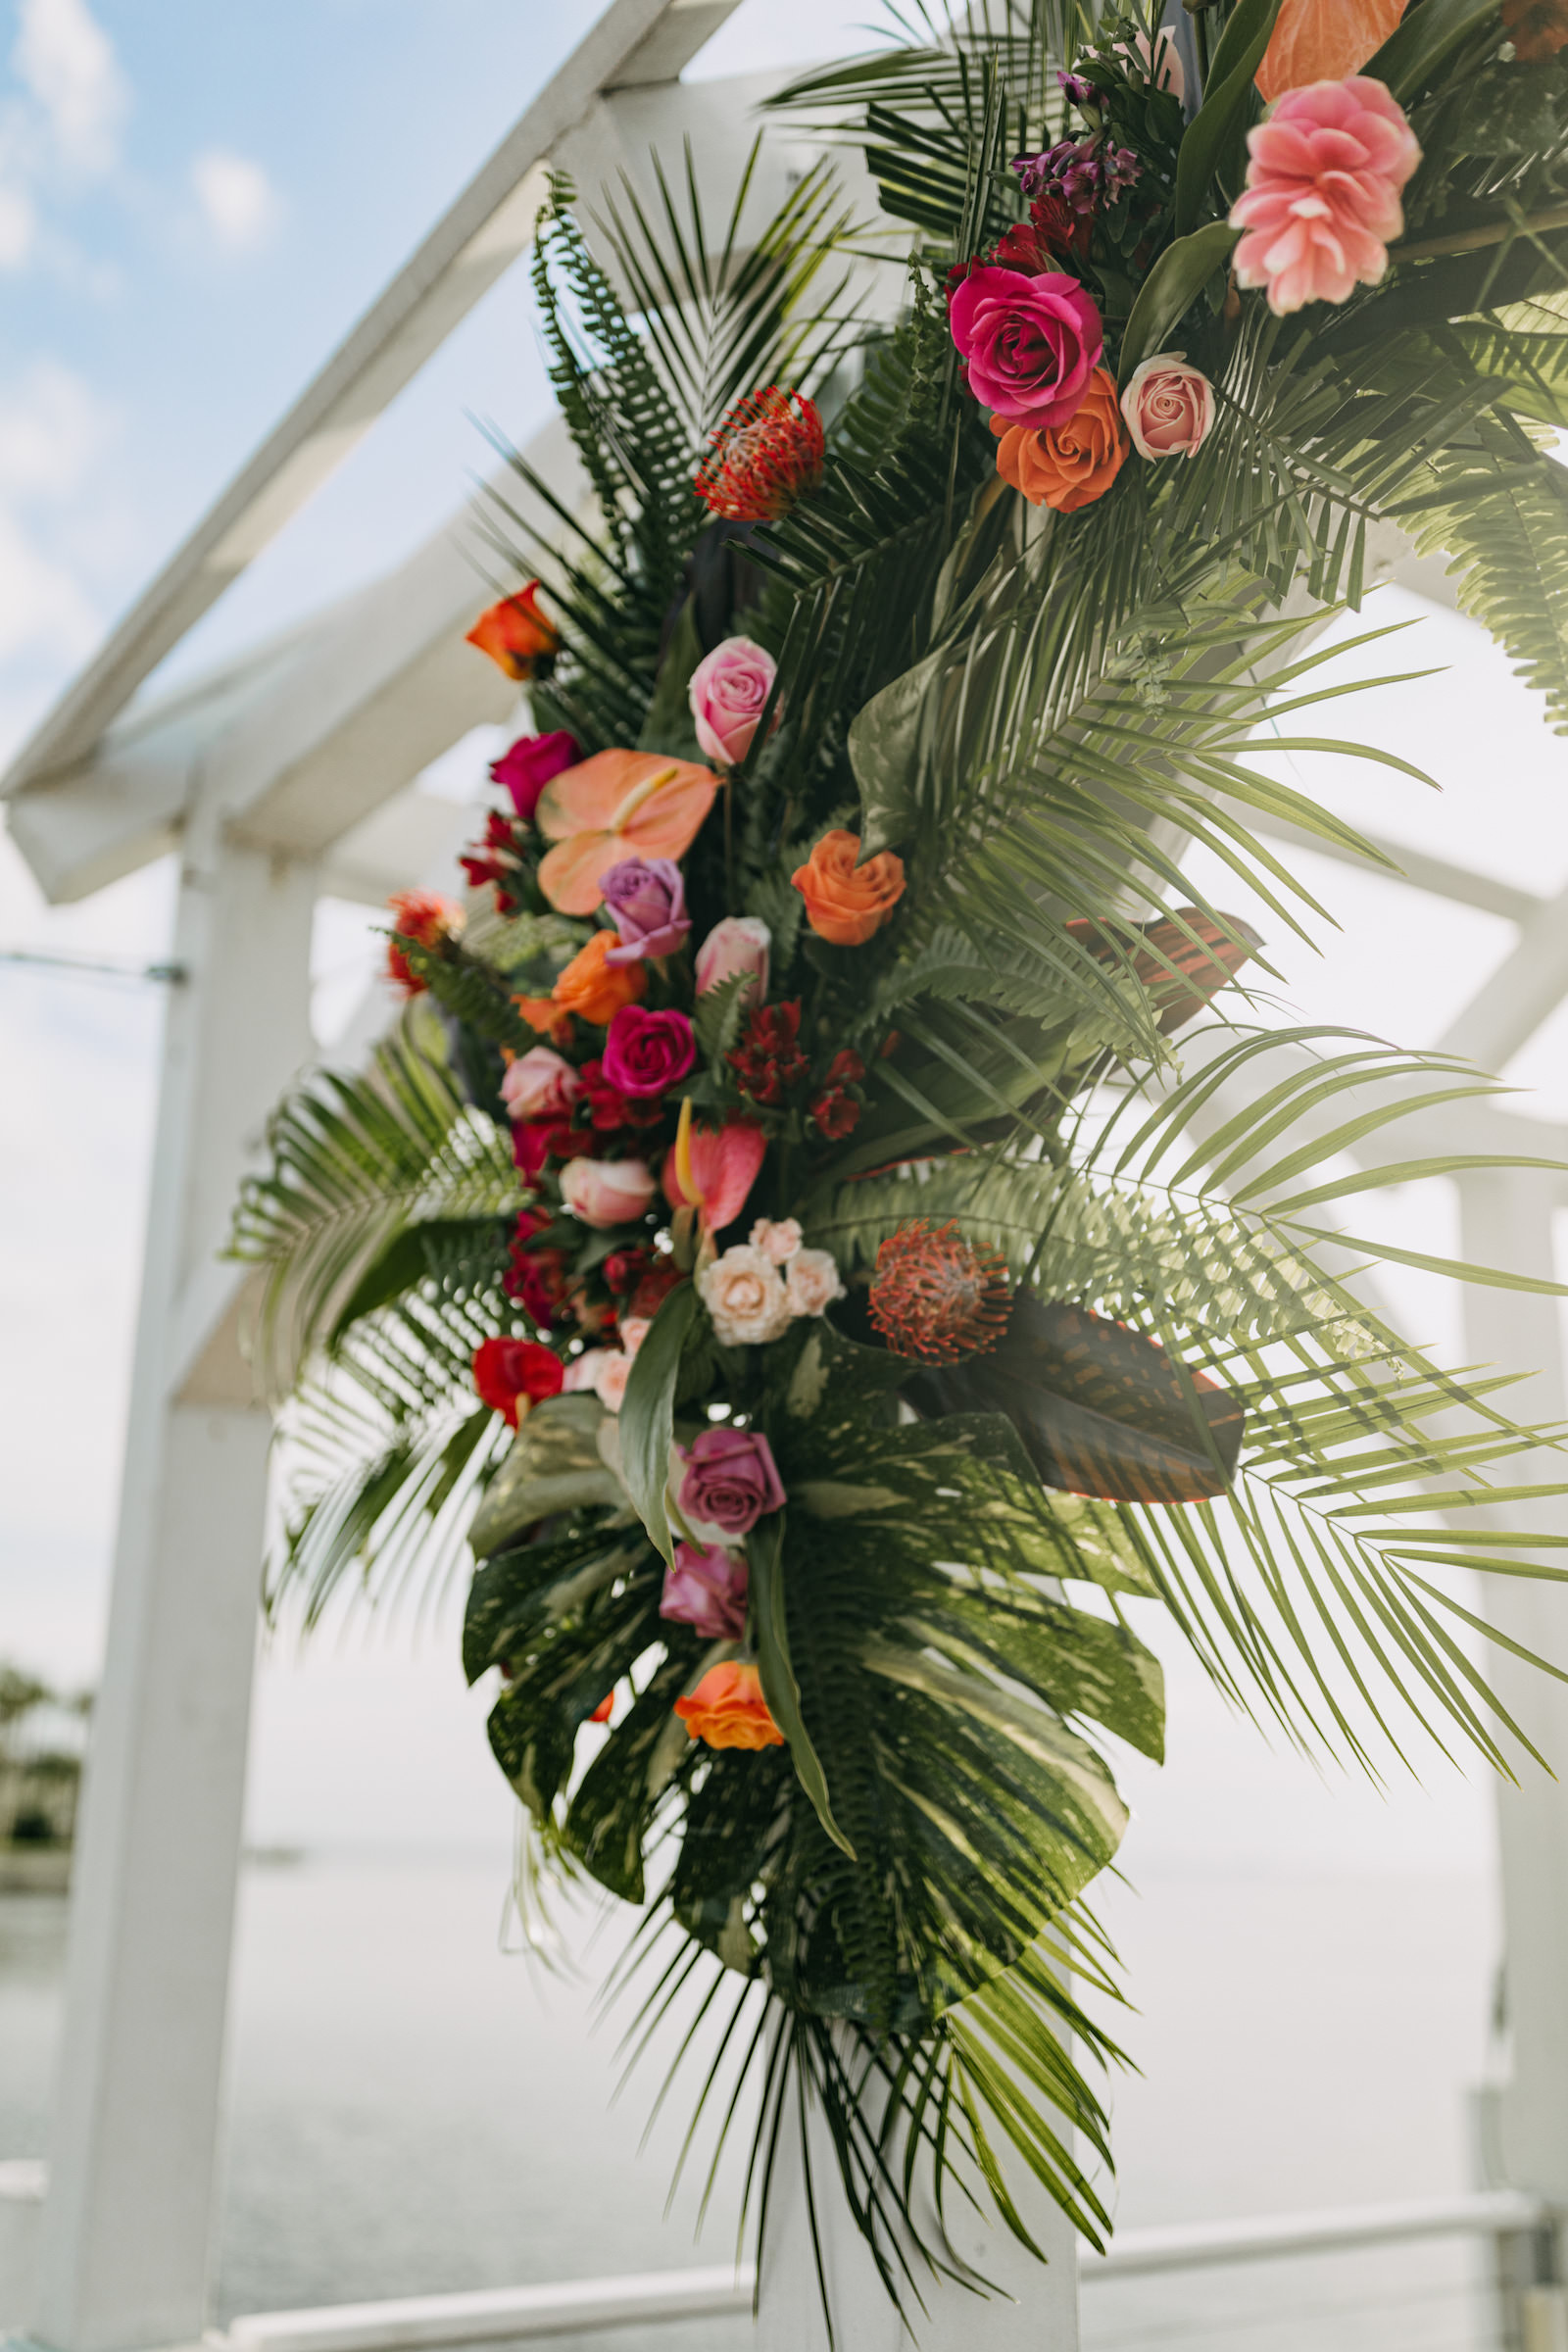 Tropical Colorful Wedding Floral Arrangement, Monstera Leaves, Palm Tree Leaves, Red, Orange and Pink Roses | Tampa Bay Wedding Florist Brides N Blooms | Wedding Planner Elope Tampa Bay | Amber McWhorter Photography | Styled Shoot